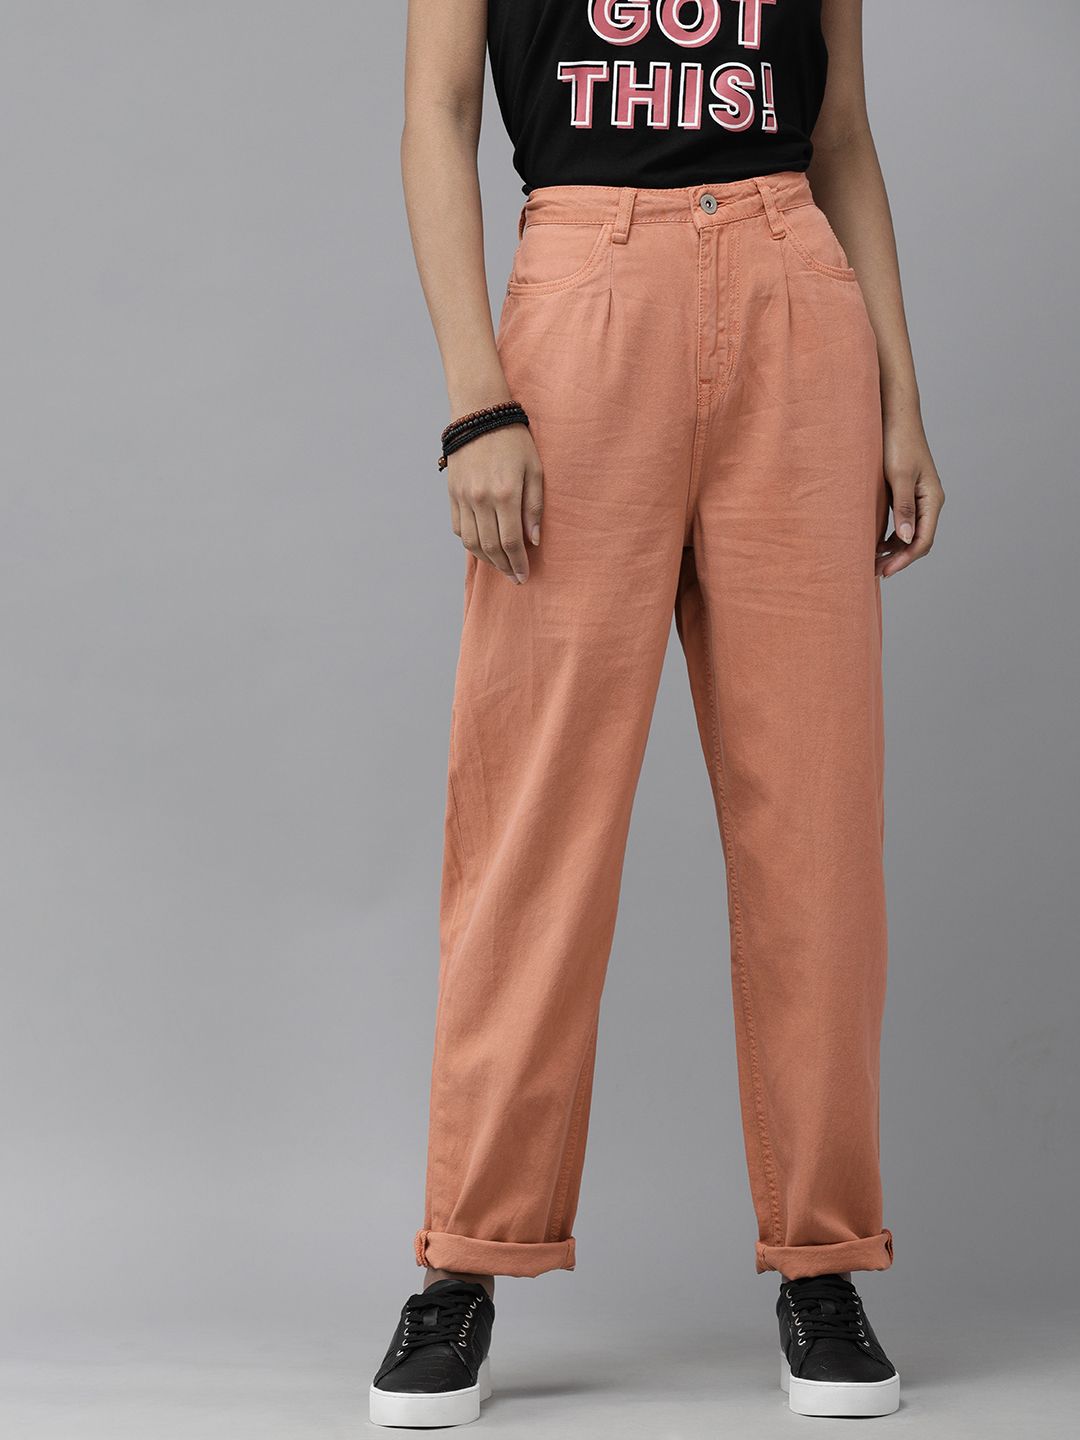 The Roadster Lifestyle Co Women Orange Slouchy Fit High-Rise Stretchable Jeans Price in India